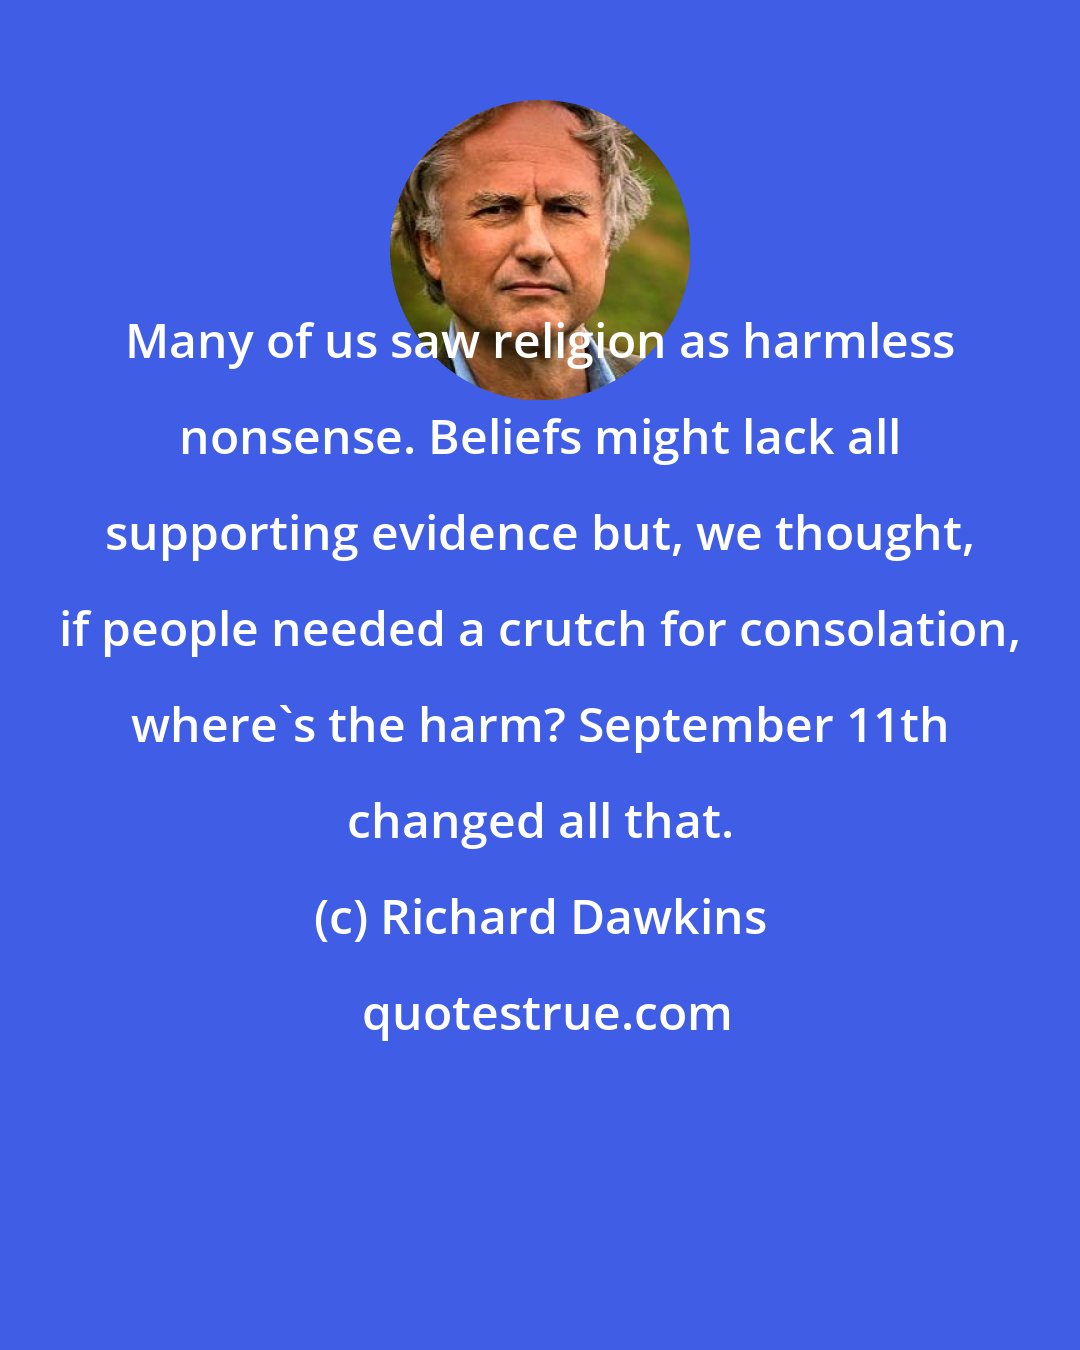 Richard Dawkins: Many of us saw religion as harmless nonsense. Beliefs might lack all supporting evidence but, we thought, if people needed a crutch for consolation, where's the harm? September 11th changed all that.